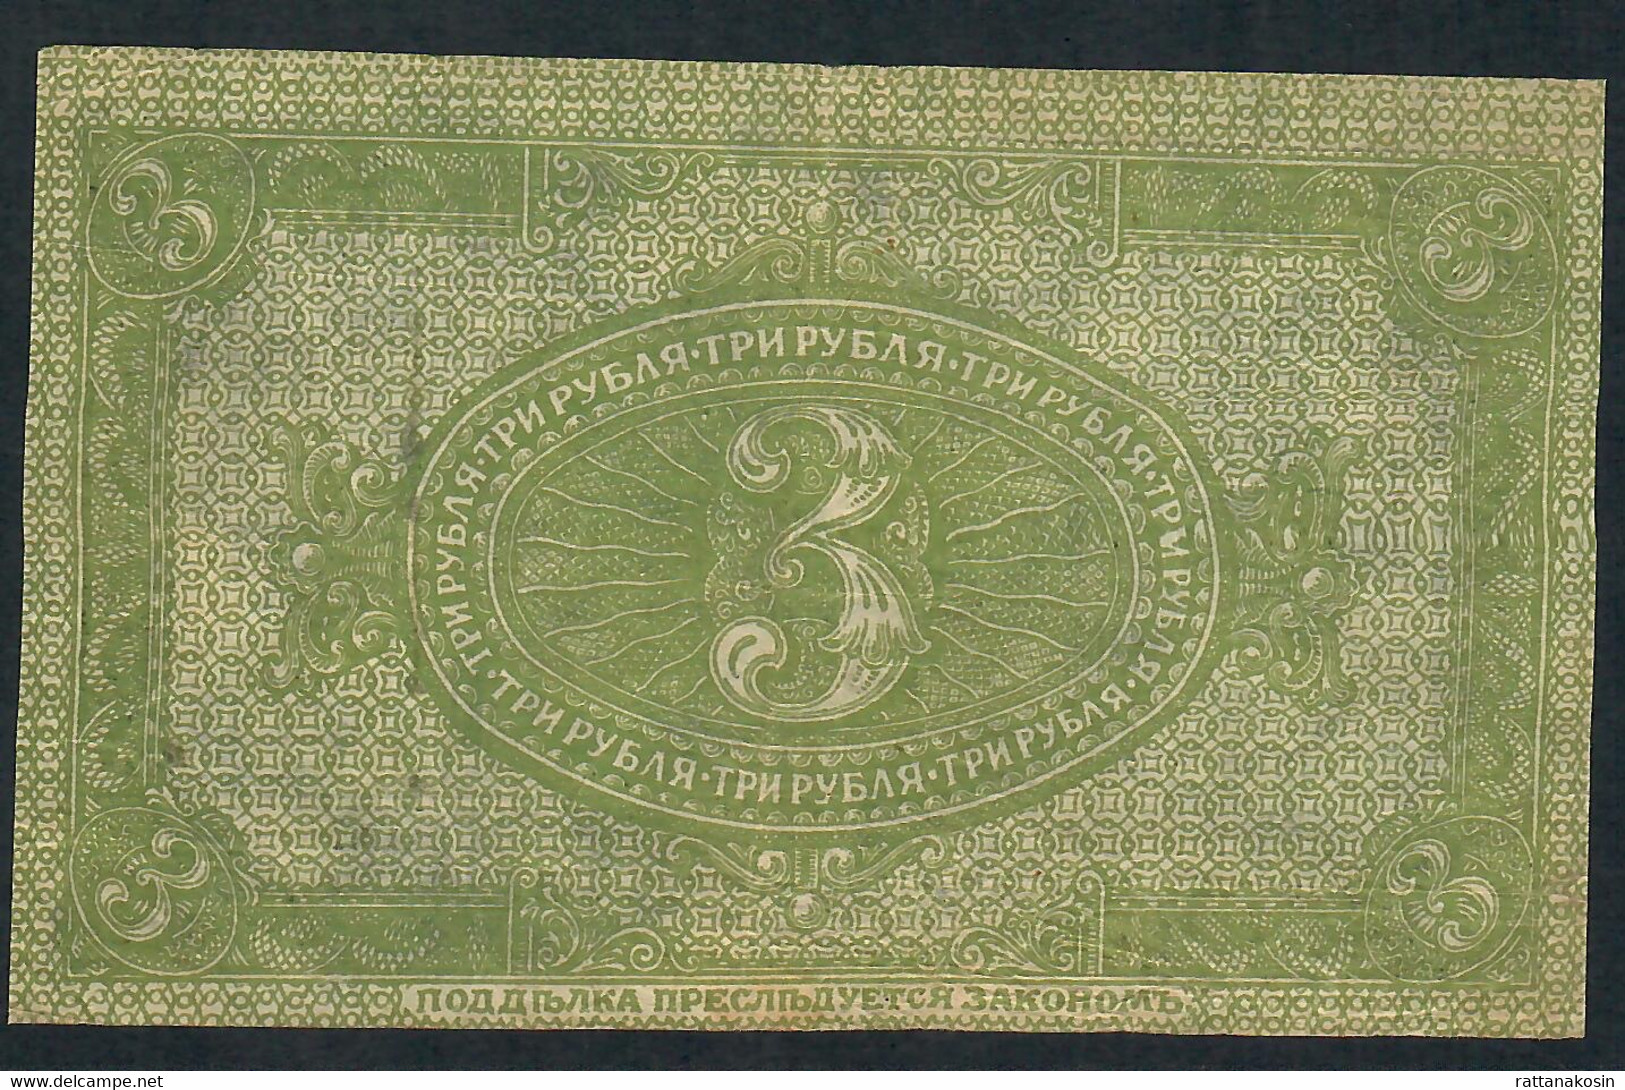 RUSSIA SIBERIA AND URAL  PS827  3  RUBLES  1919  VF Only 1 Small Vertical Fold - Russie